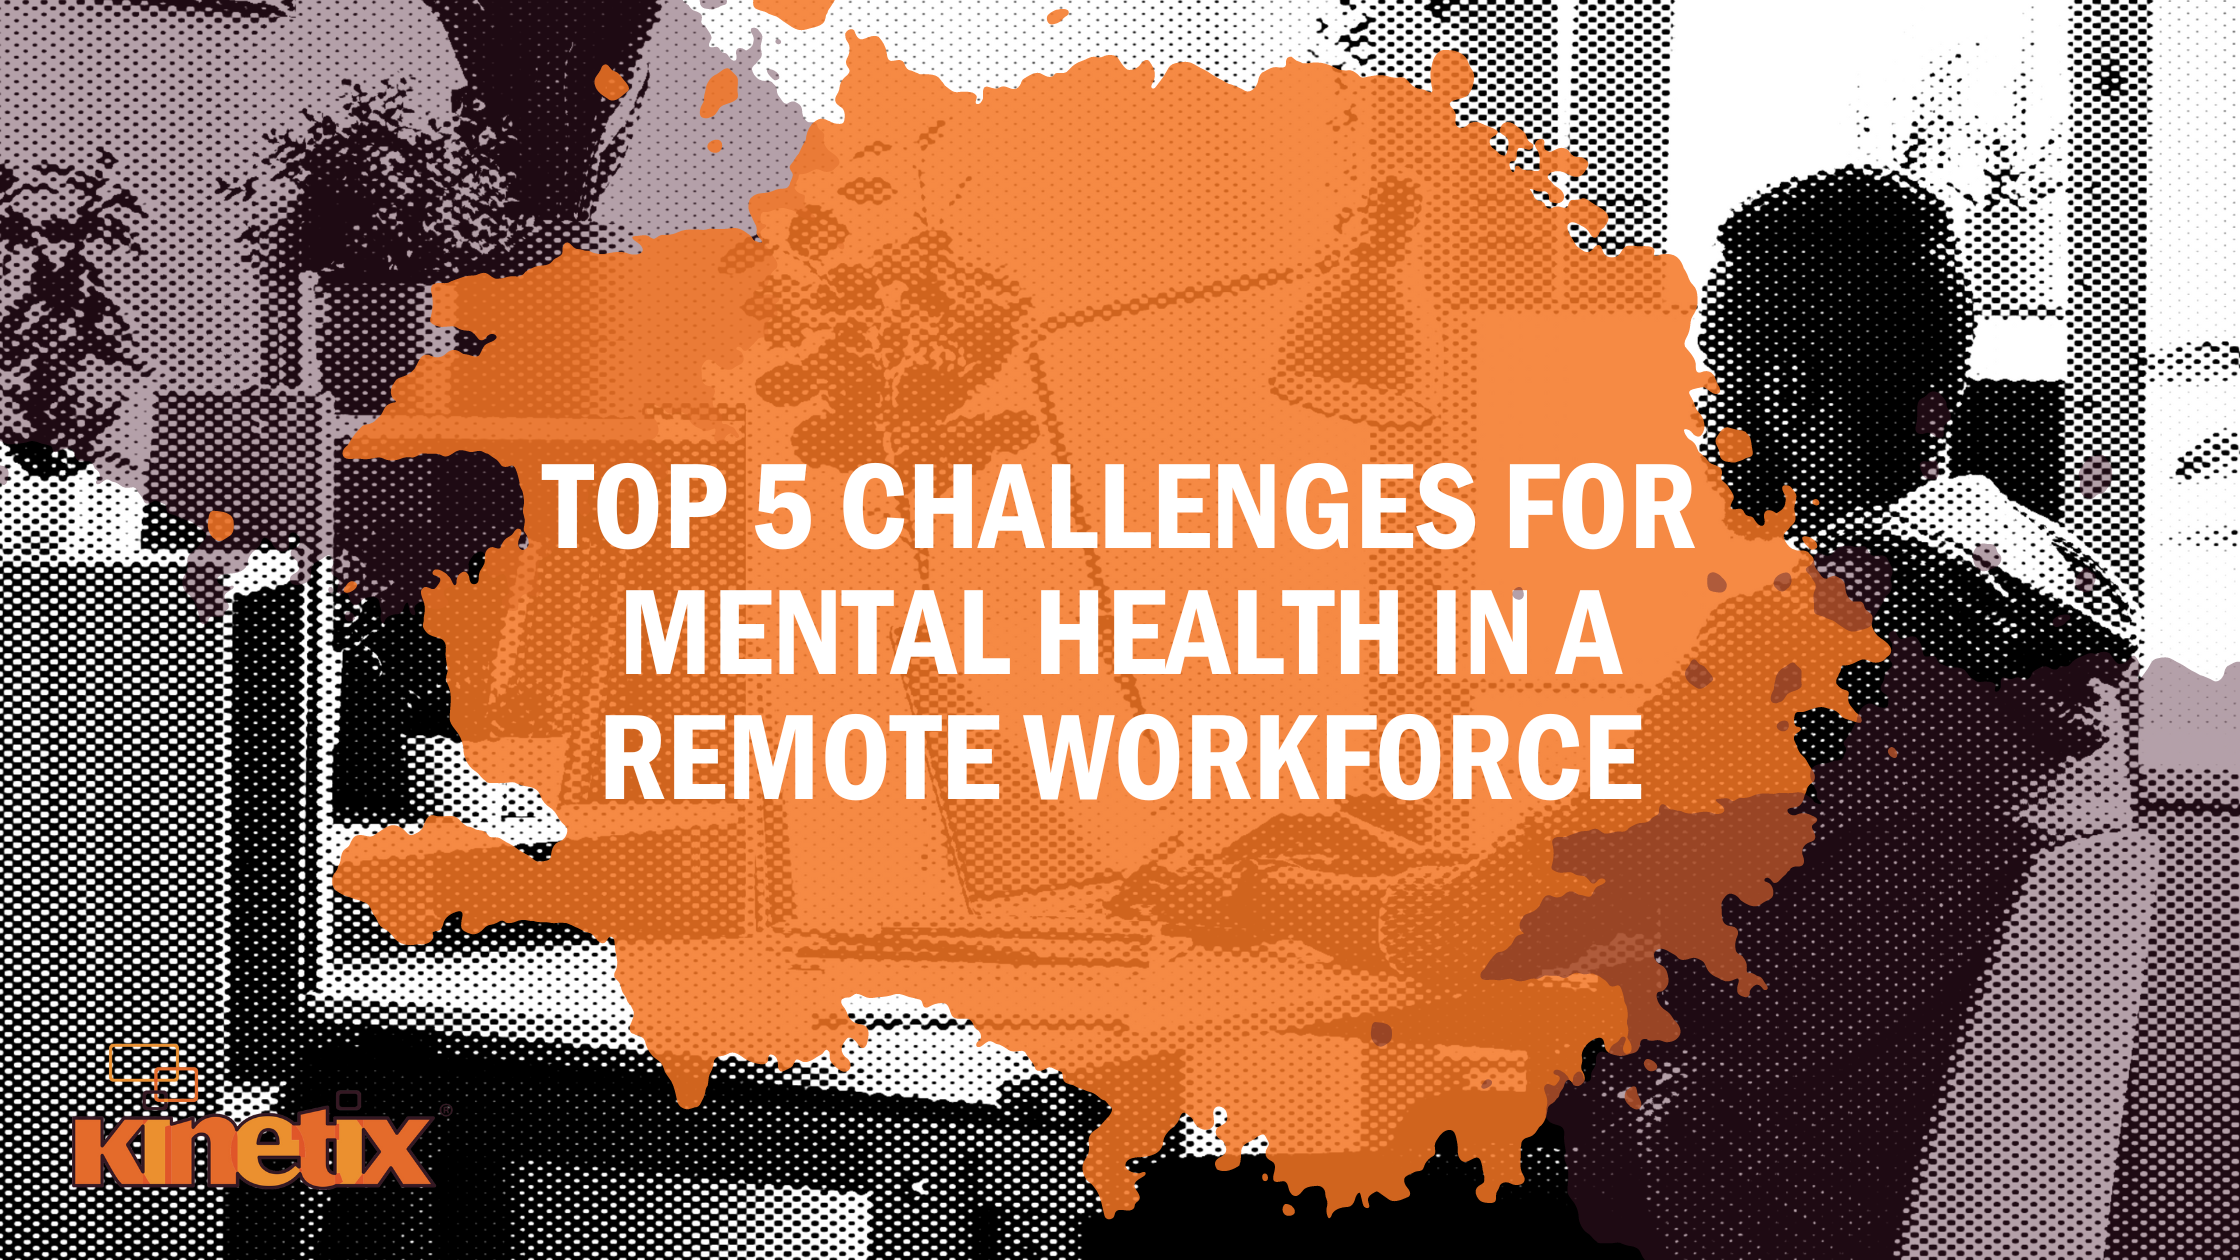 Top 5 Challenges For Mental Health in a Remote Workforce